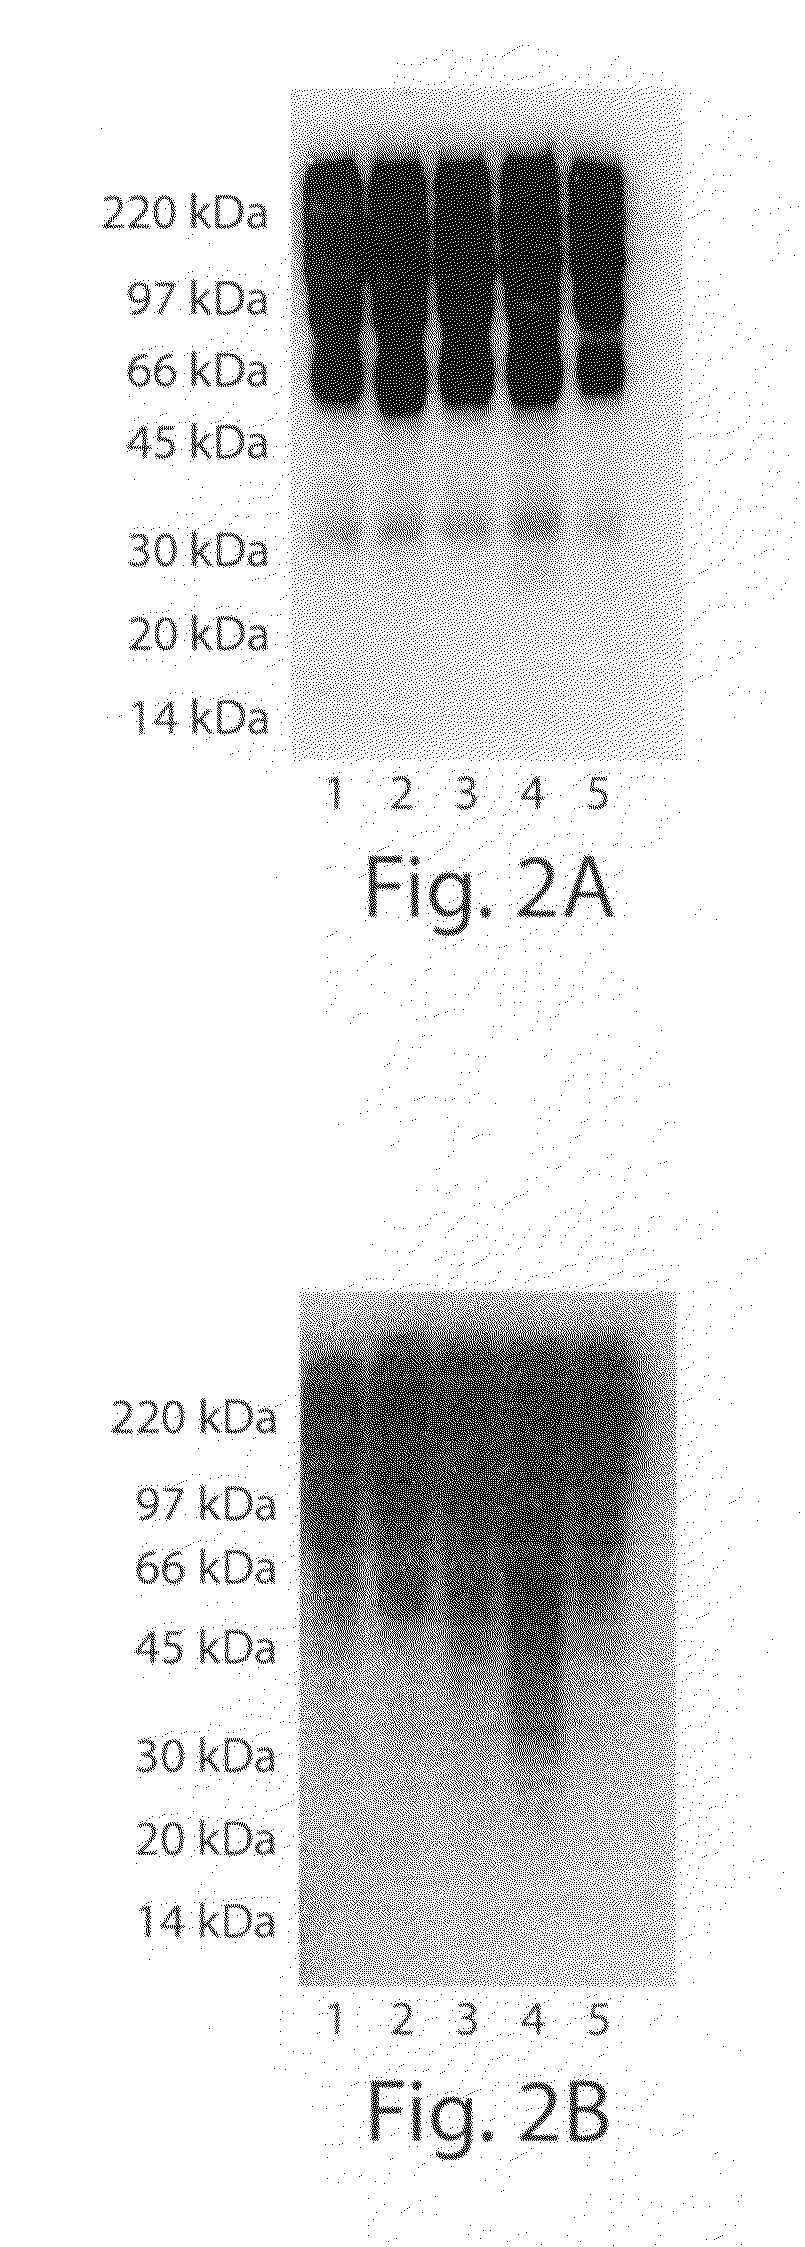 Production of proteins carrying oligomannose or human-like glycans in yeast and methods of use thereof